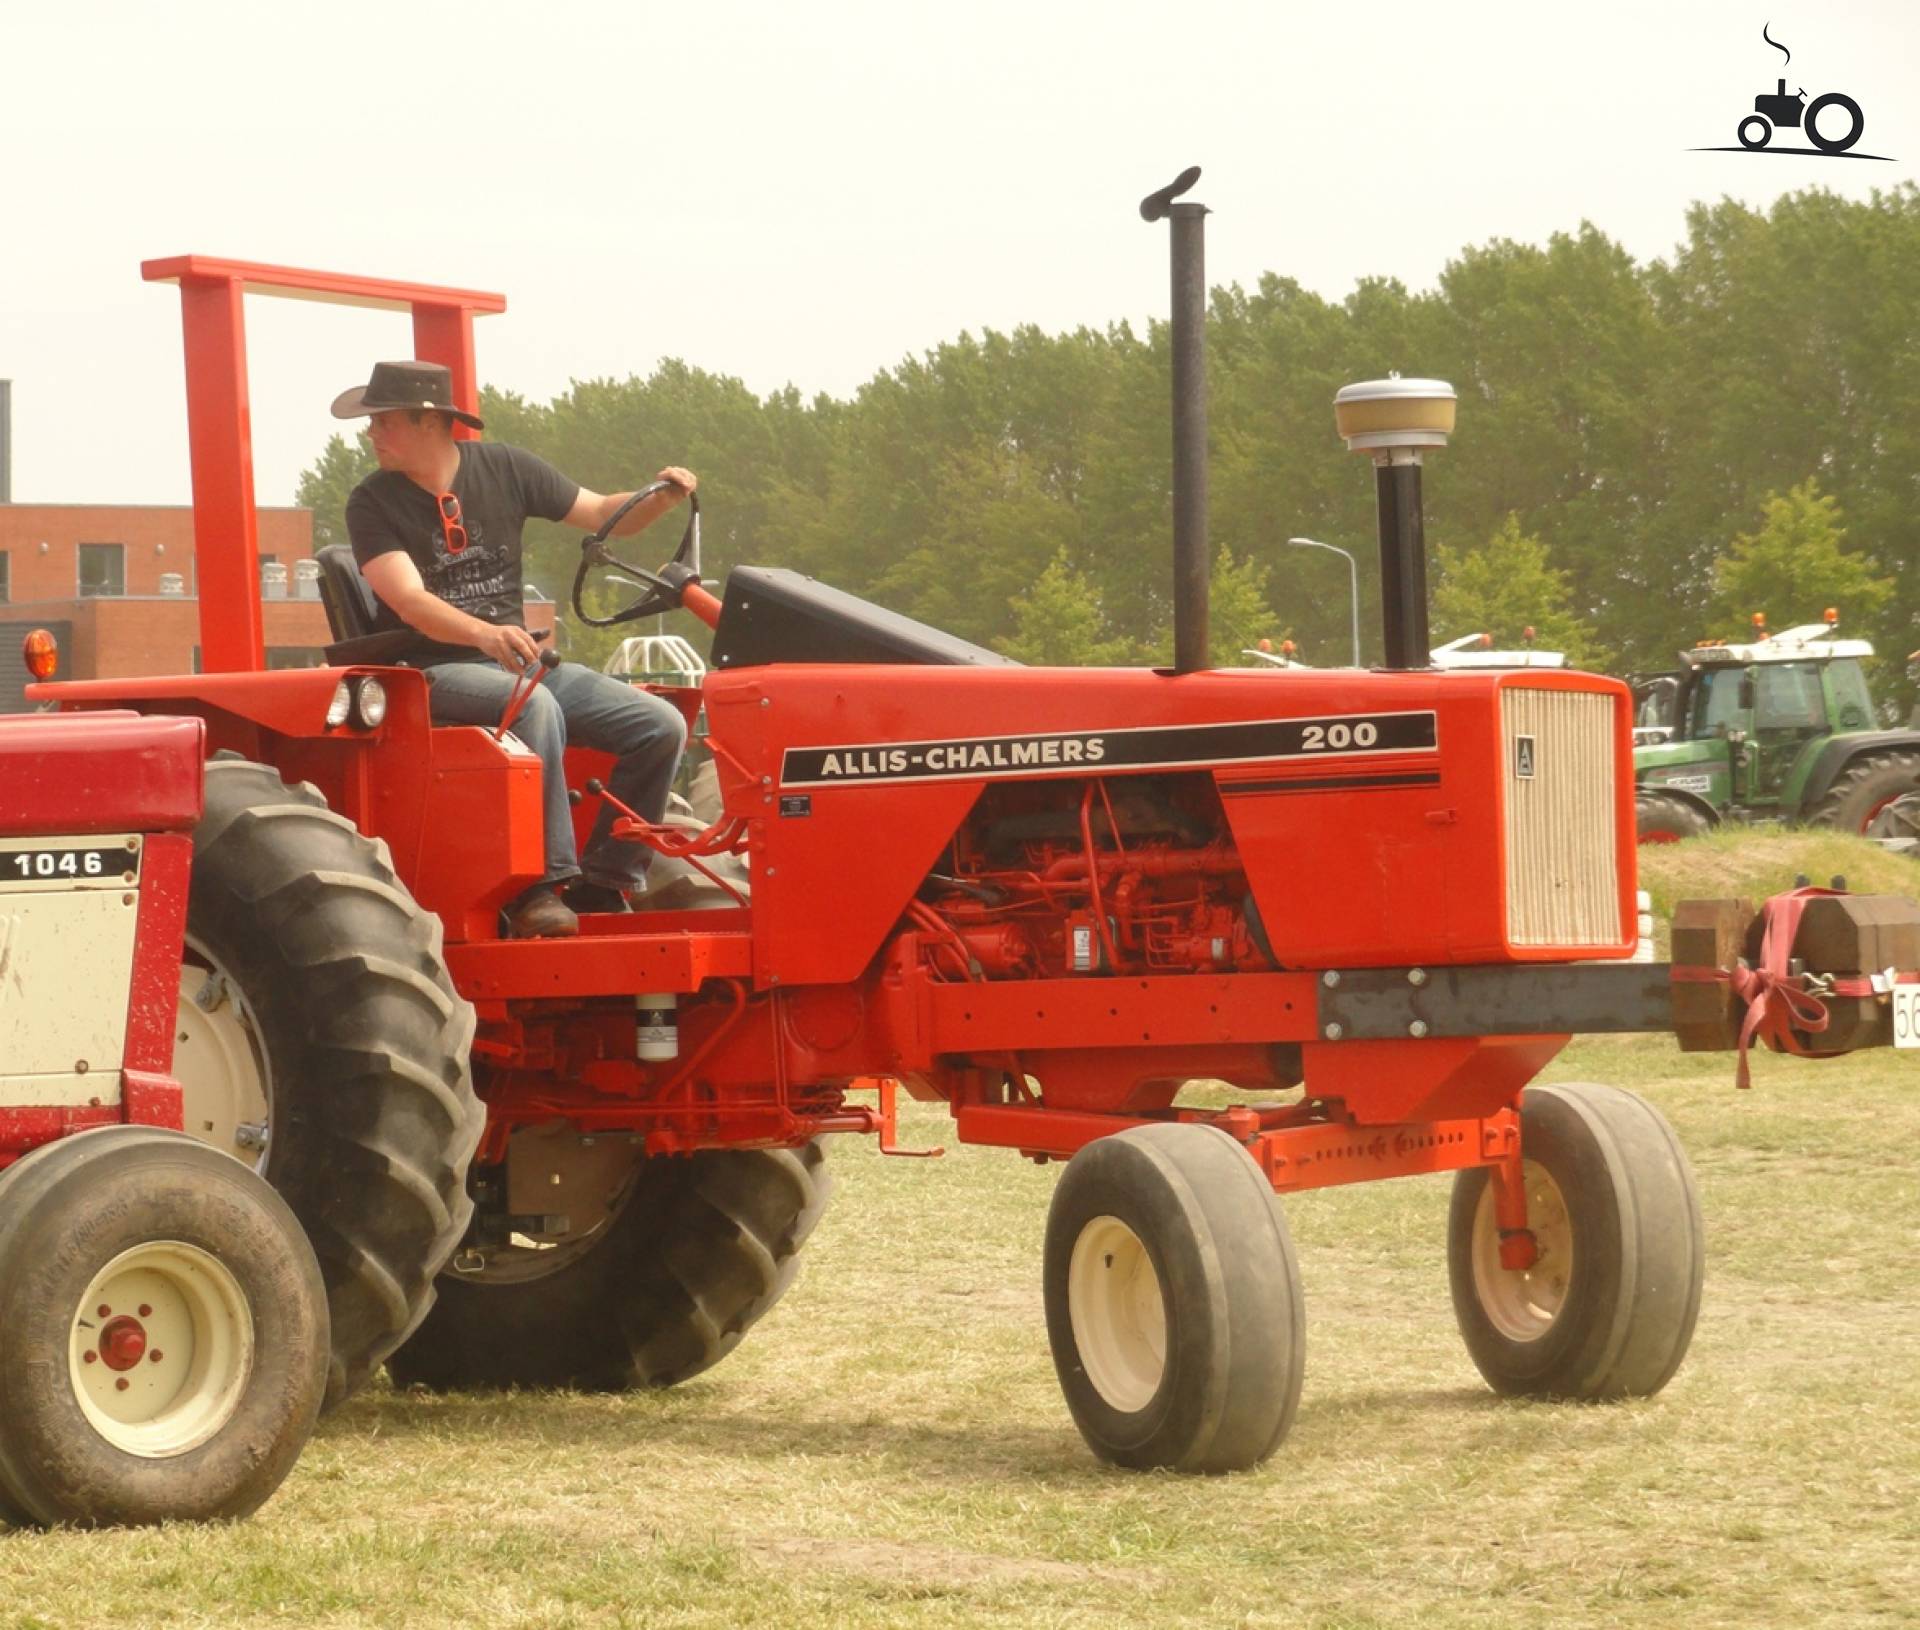 ... Chalmers 200 Specs and data - Everything about the Allis-Chalmers 200